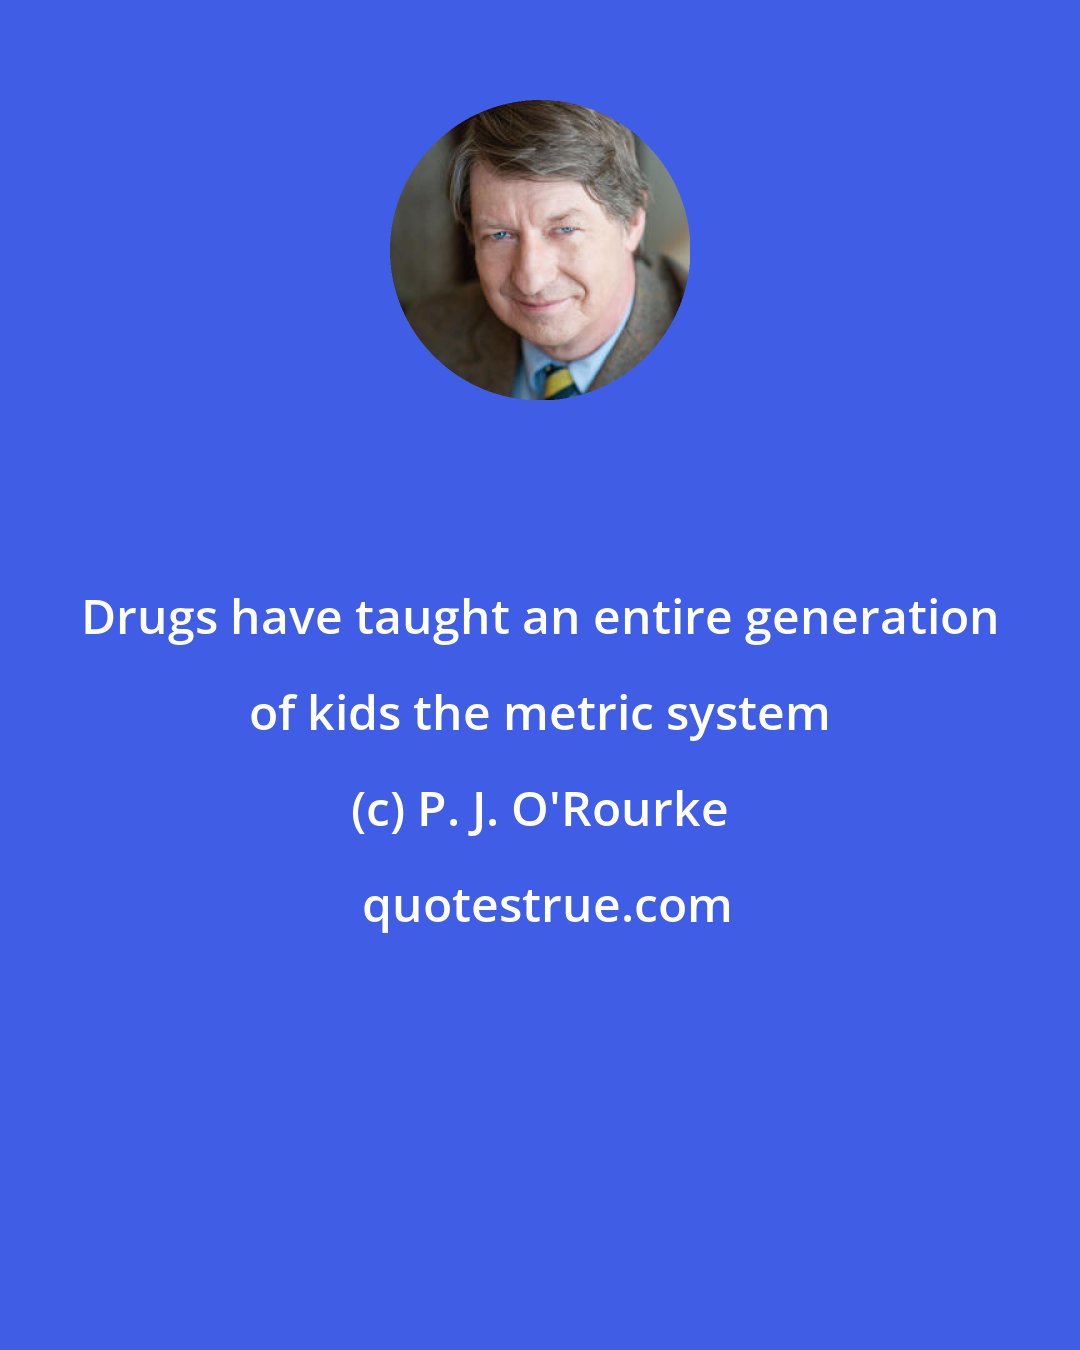 P. J. O'Rourke: Drugs have taught an entire generation of kids the metric system